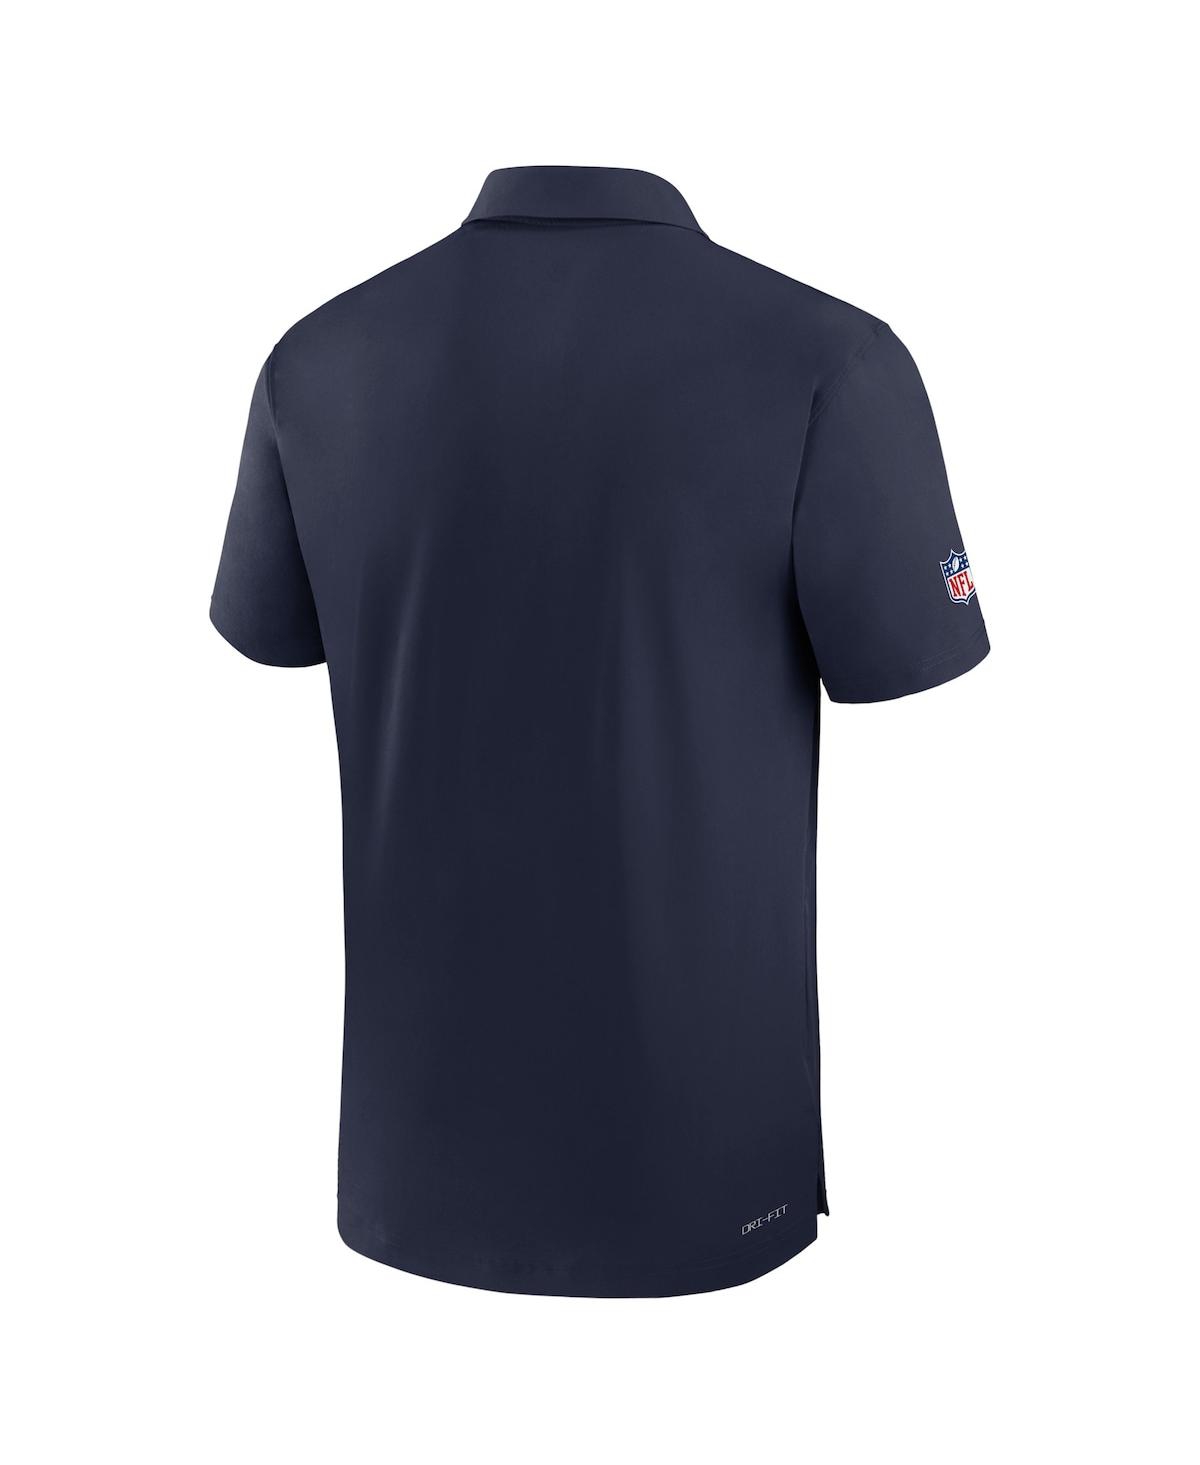 Shop Nike Men's  Navy Tennessee Titans Sideline Coaches Performance Polo Shirt